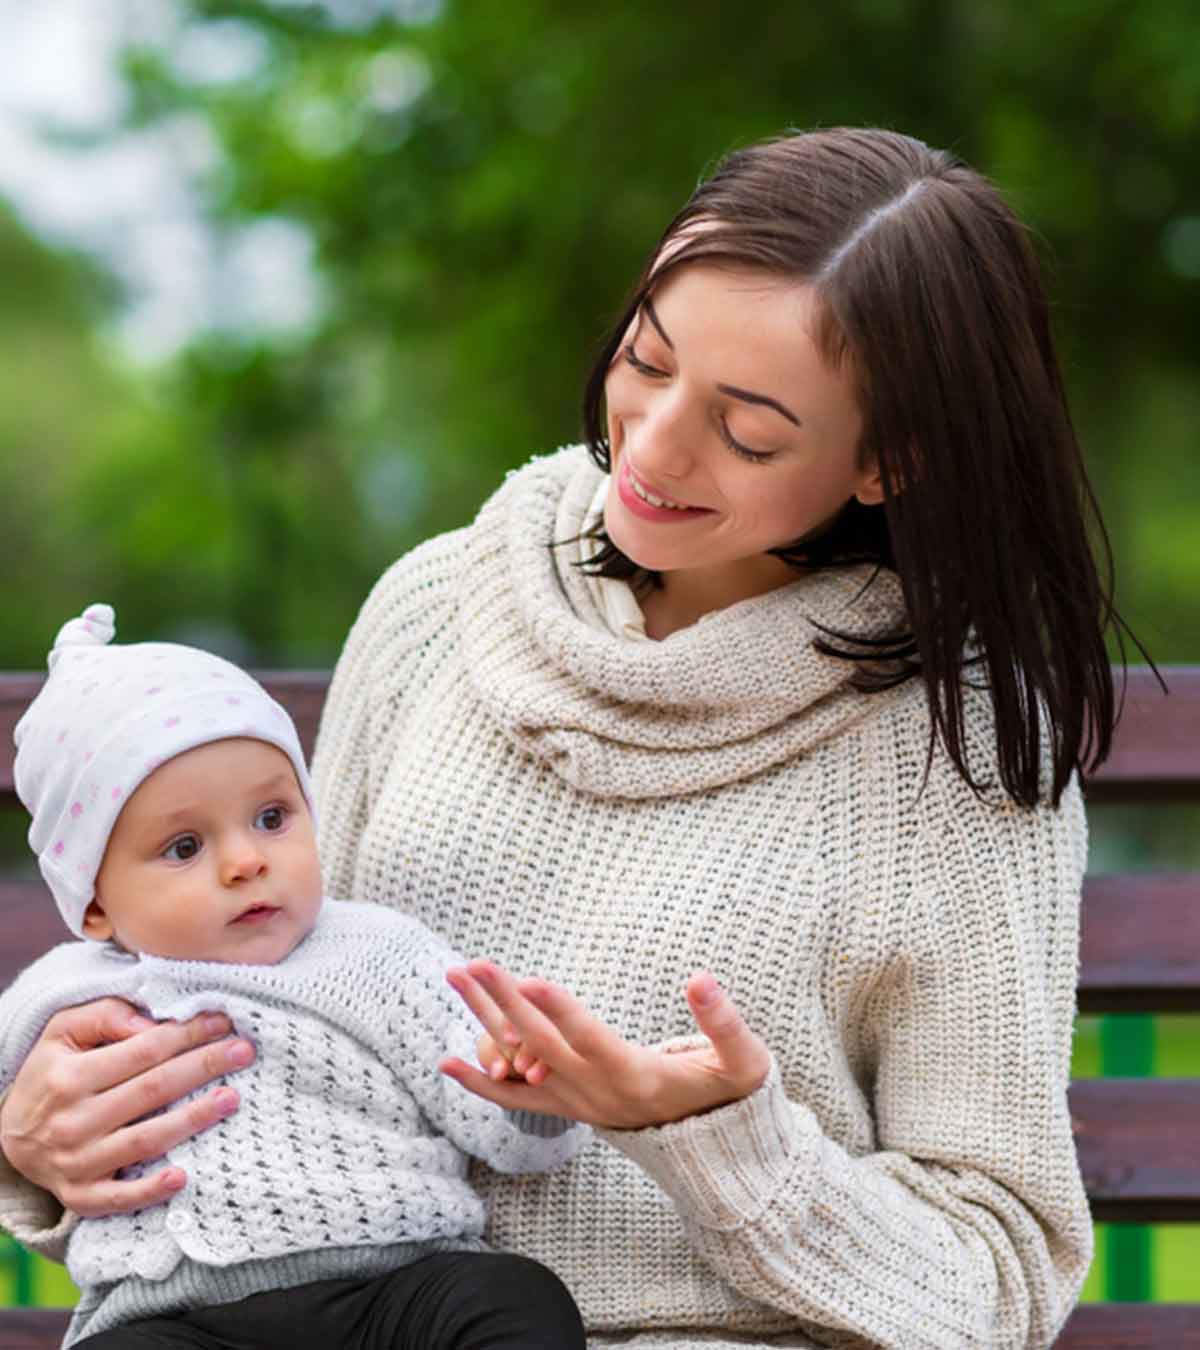 Cold Hands And Feet In Baby: Reasons And When To Worry